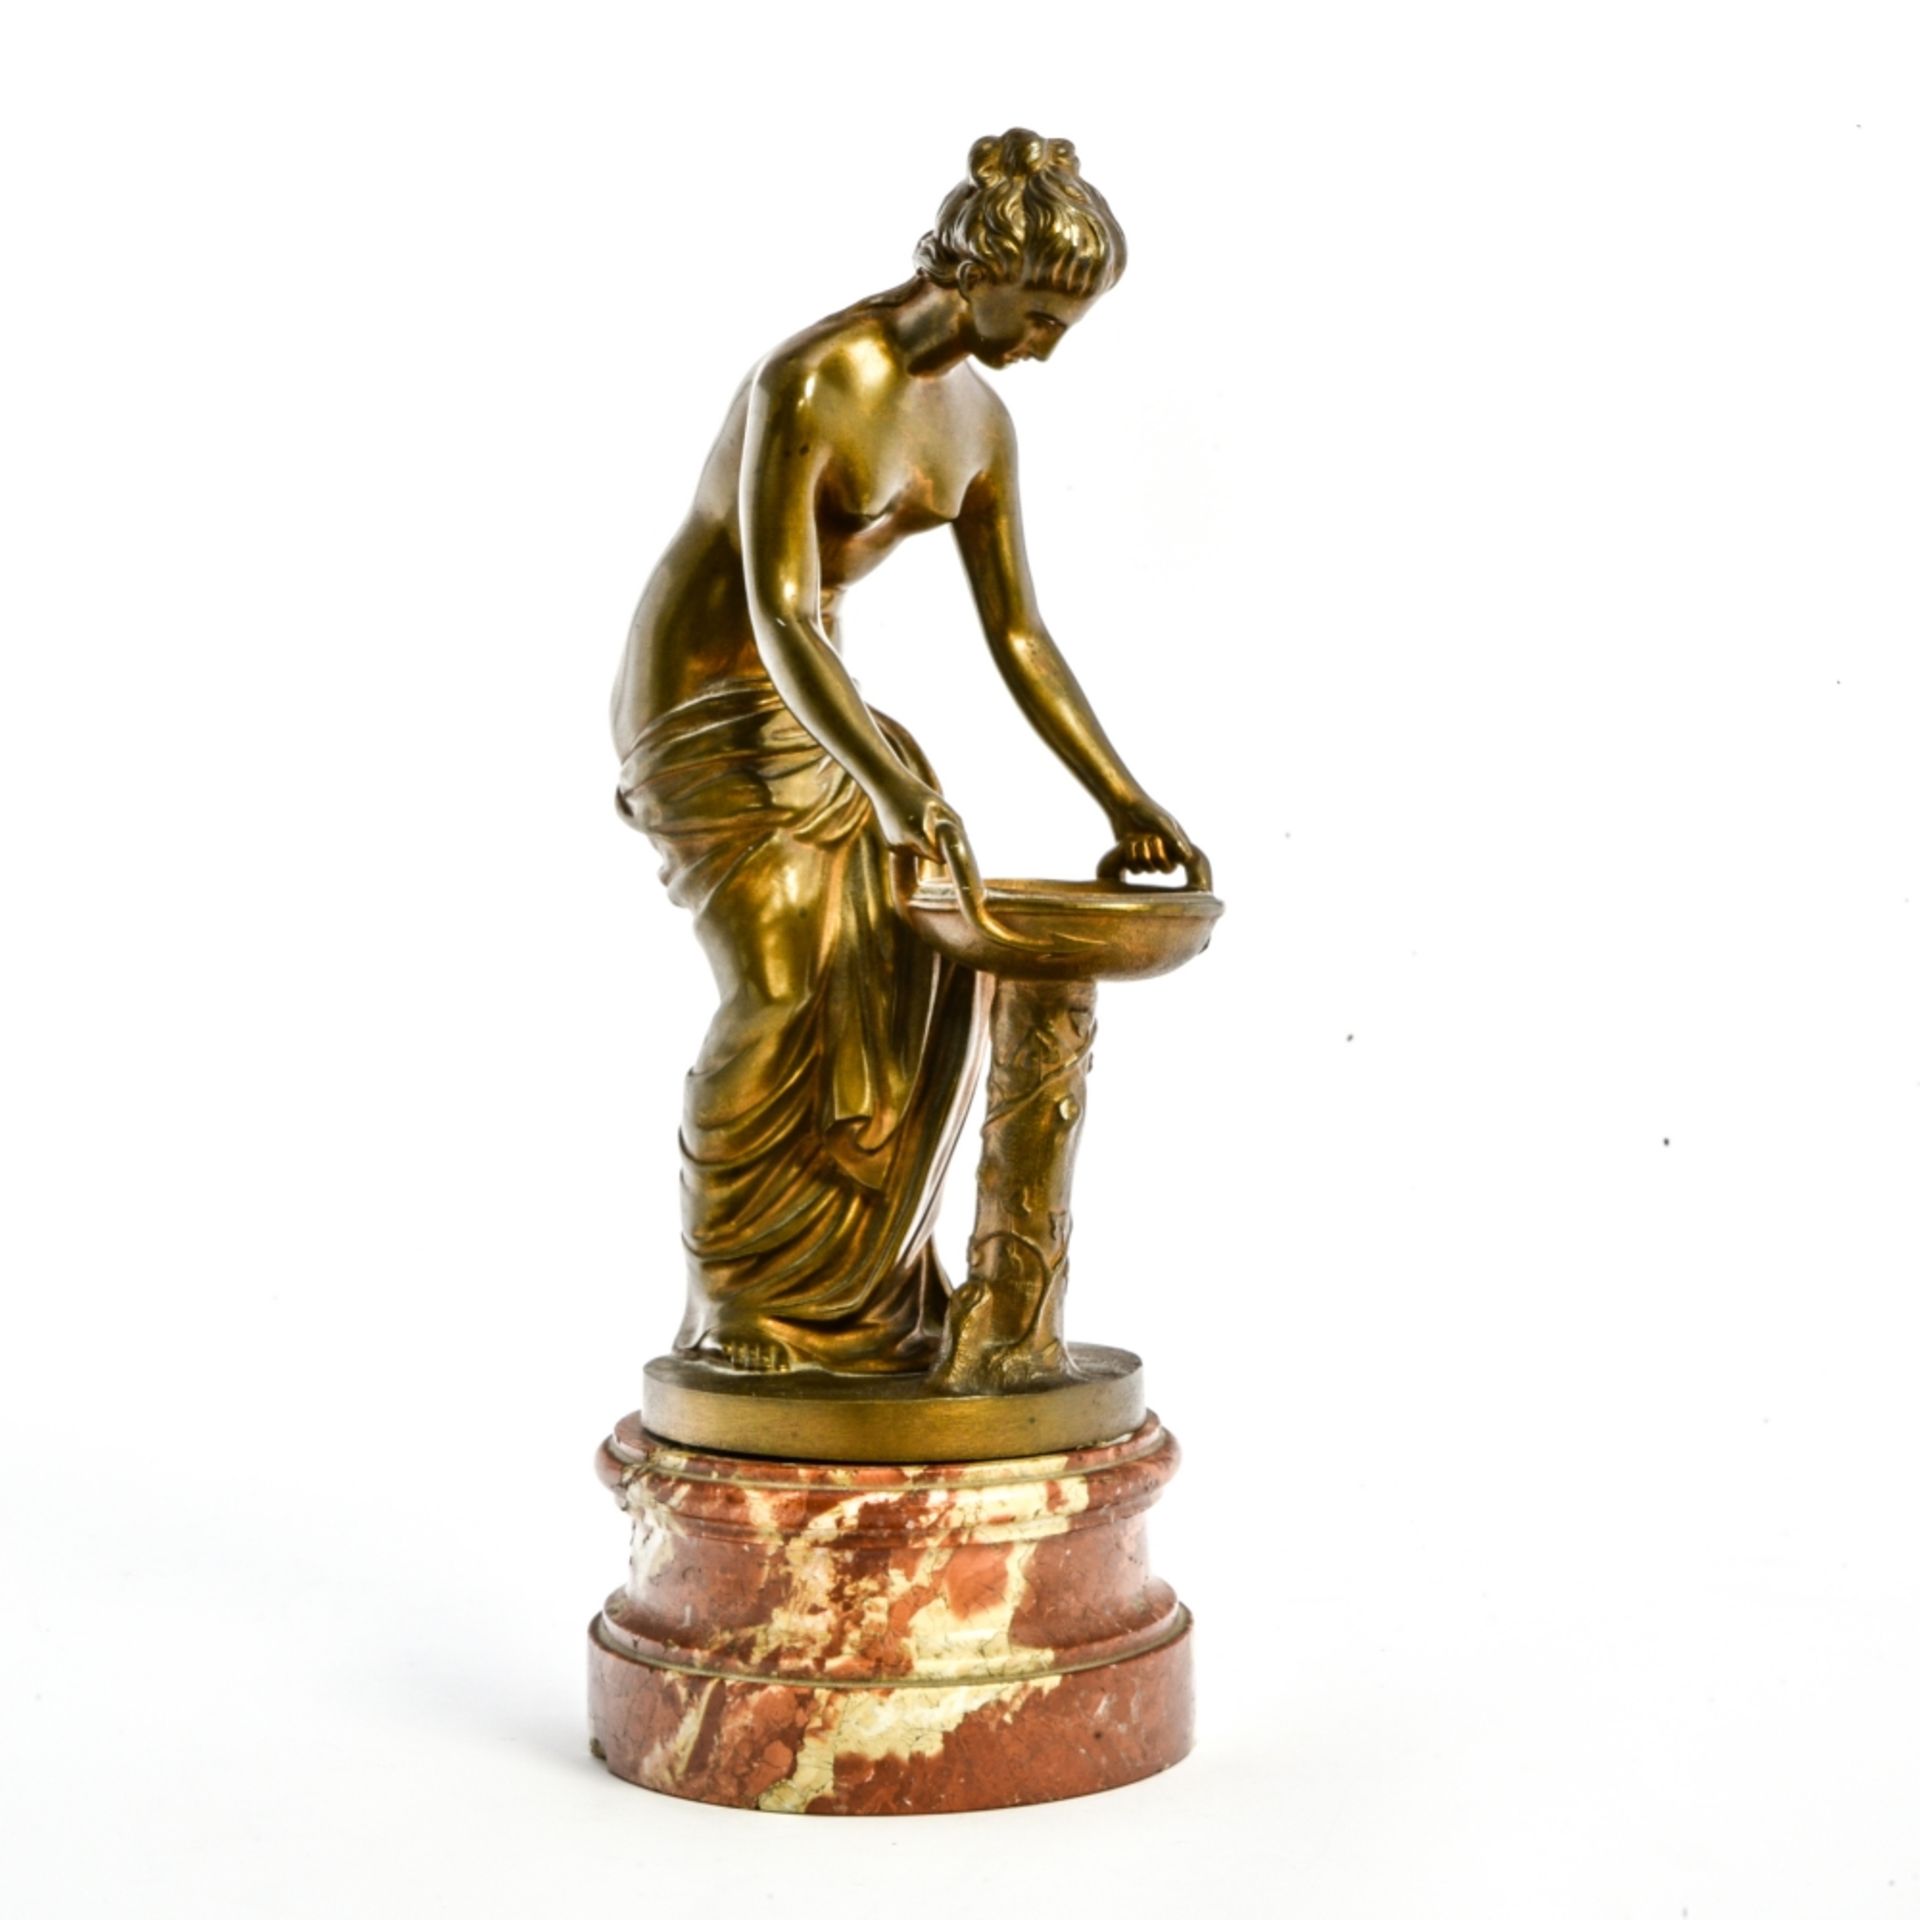 Vintage woman doing her toilette 20TH CENTURY WORK Bronze sculpture with golden patina. Red marble - Image 2 of 3